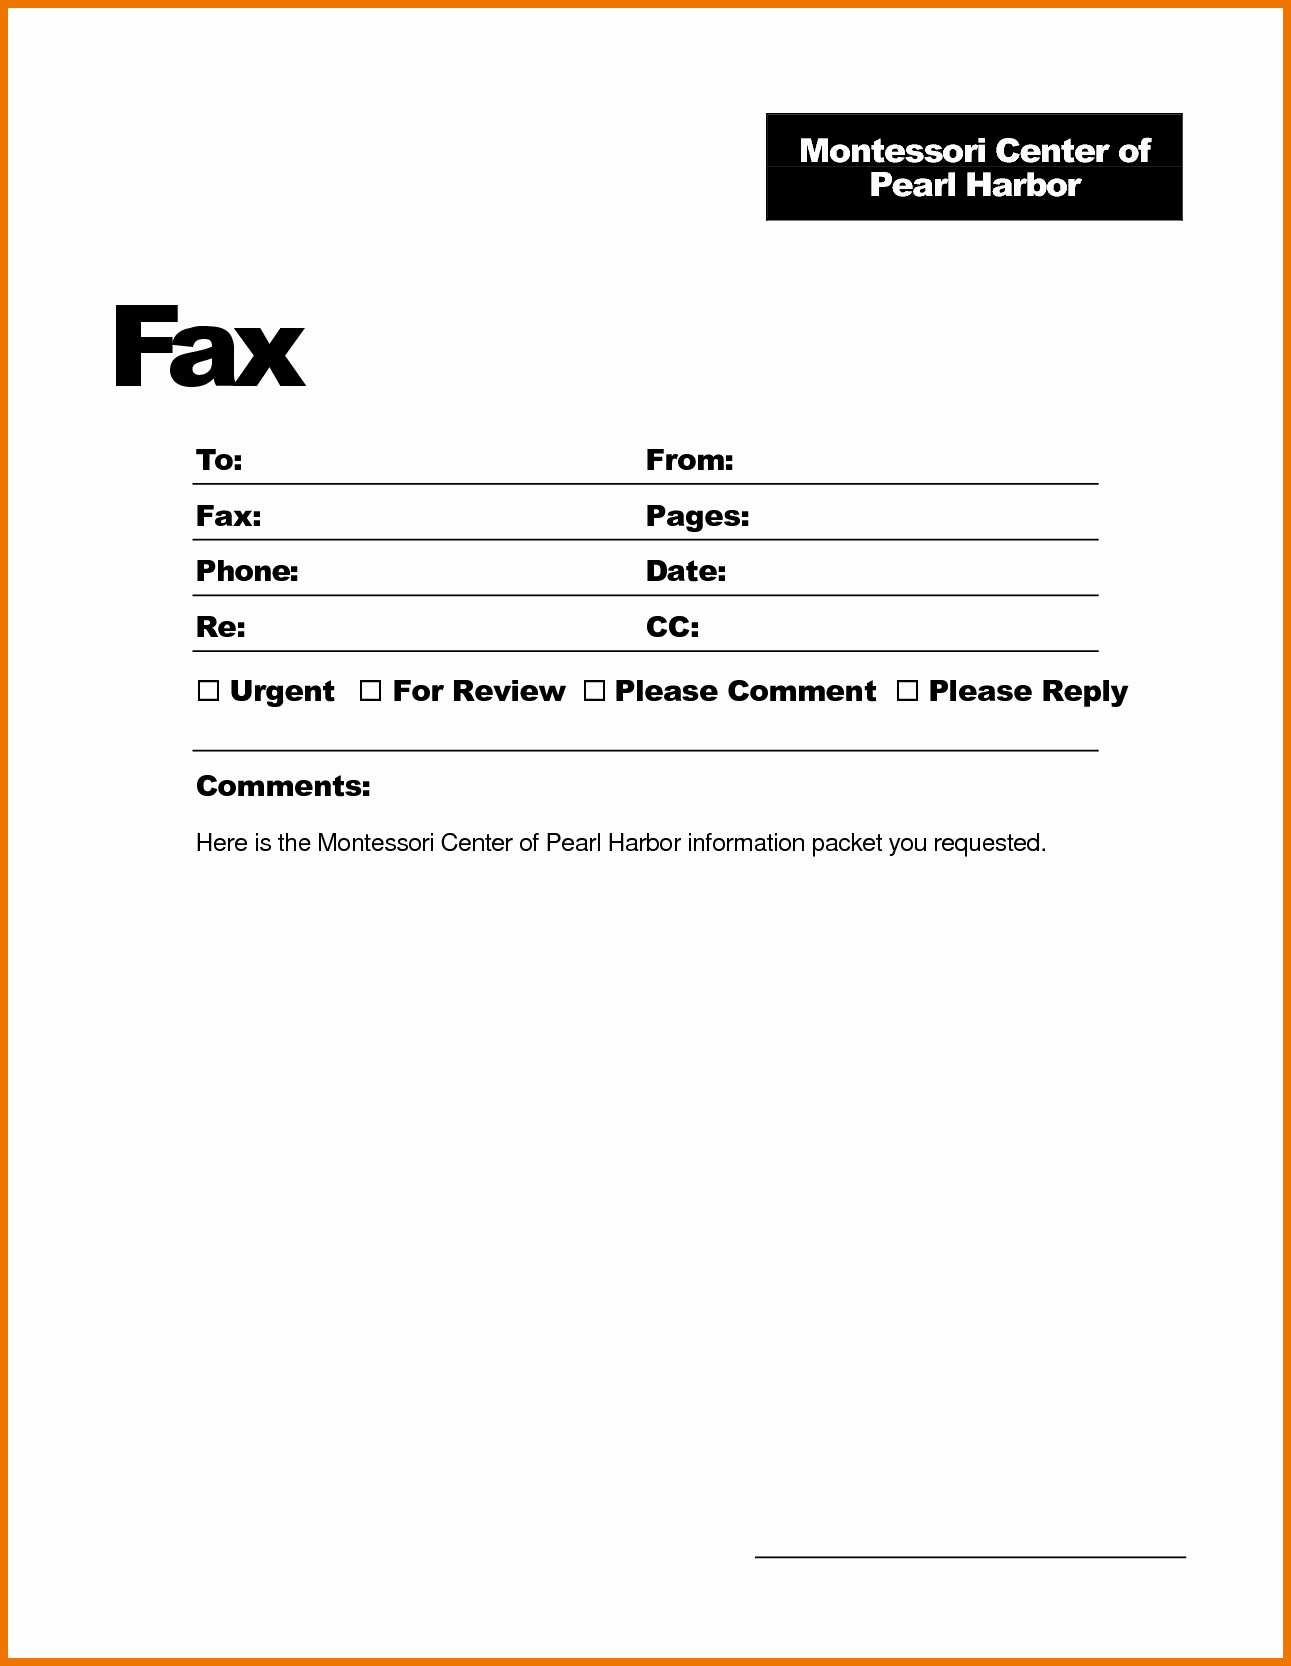 Cover Letter Template for Pages Best Of Fax Cover Letter Microsoft Word 2007